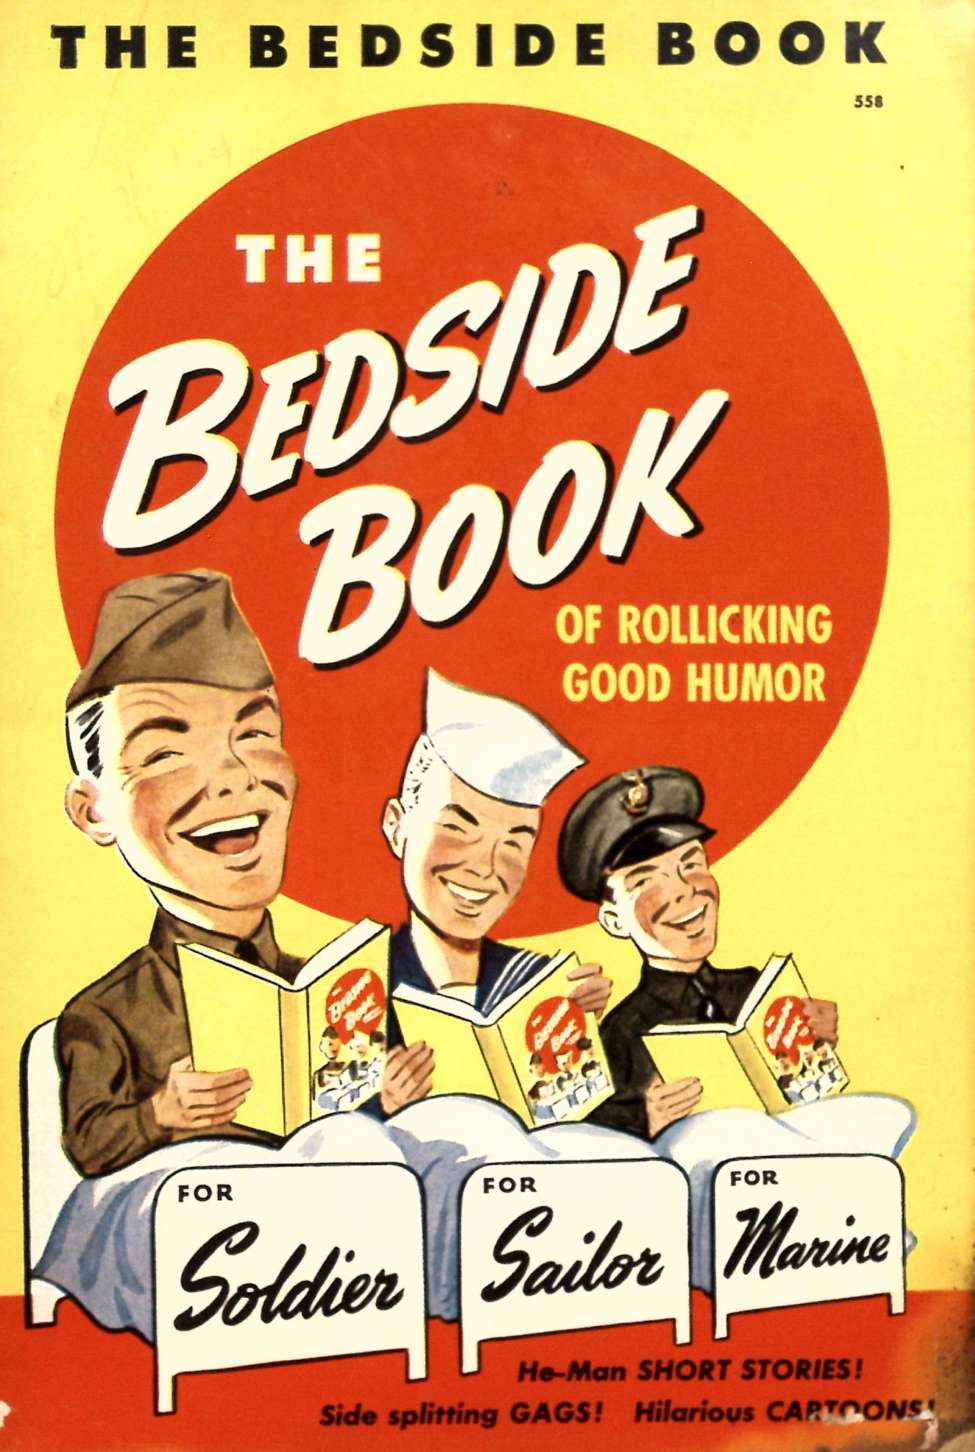 Book Cover For Best Books 558 - The Bedside Book